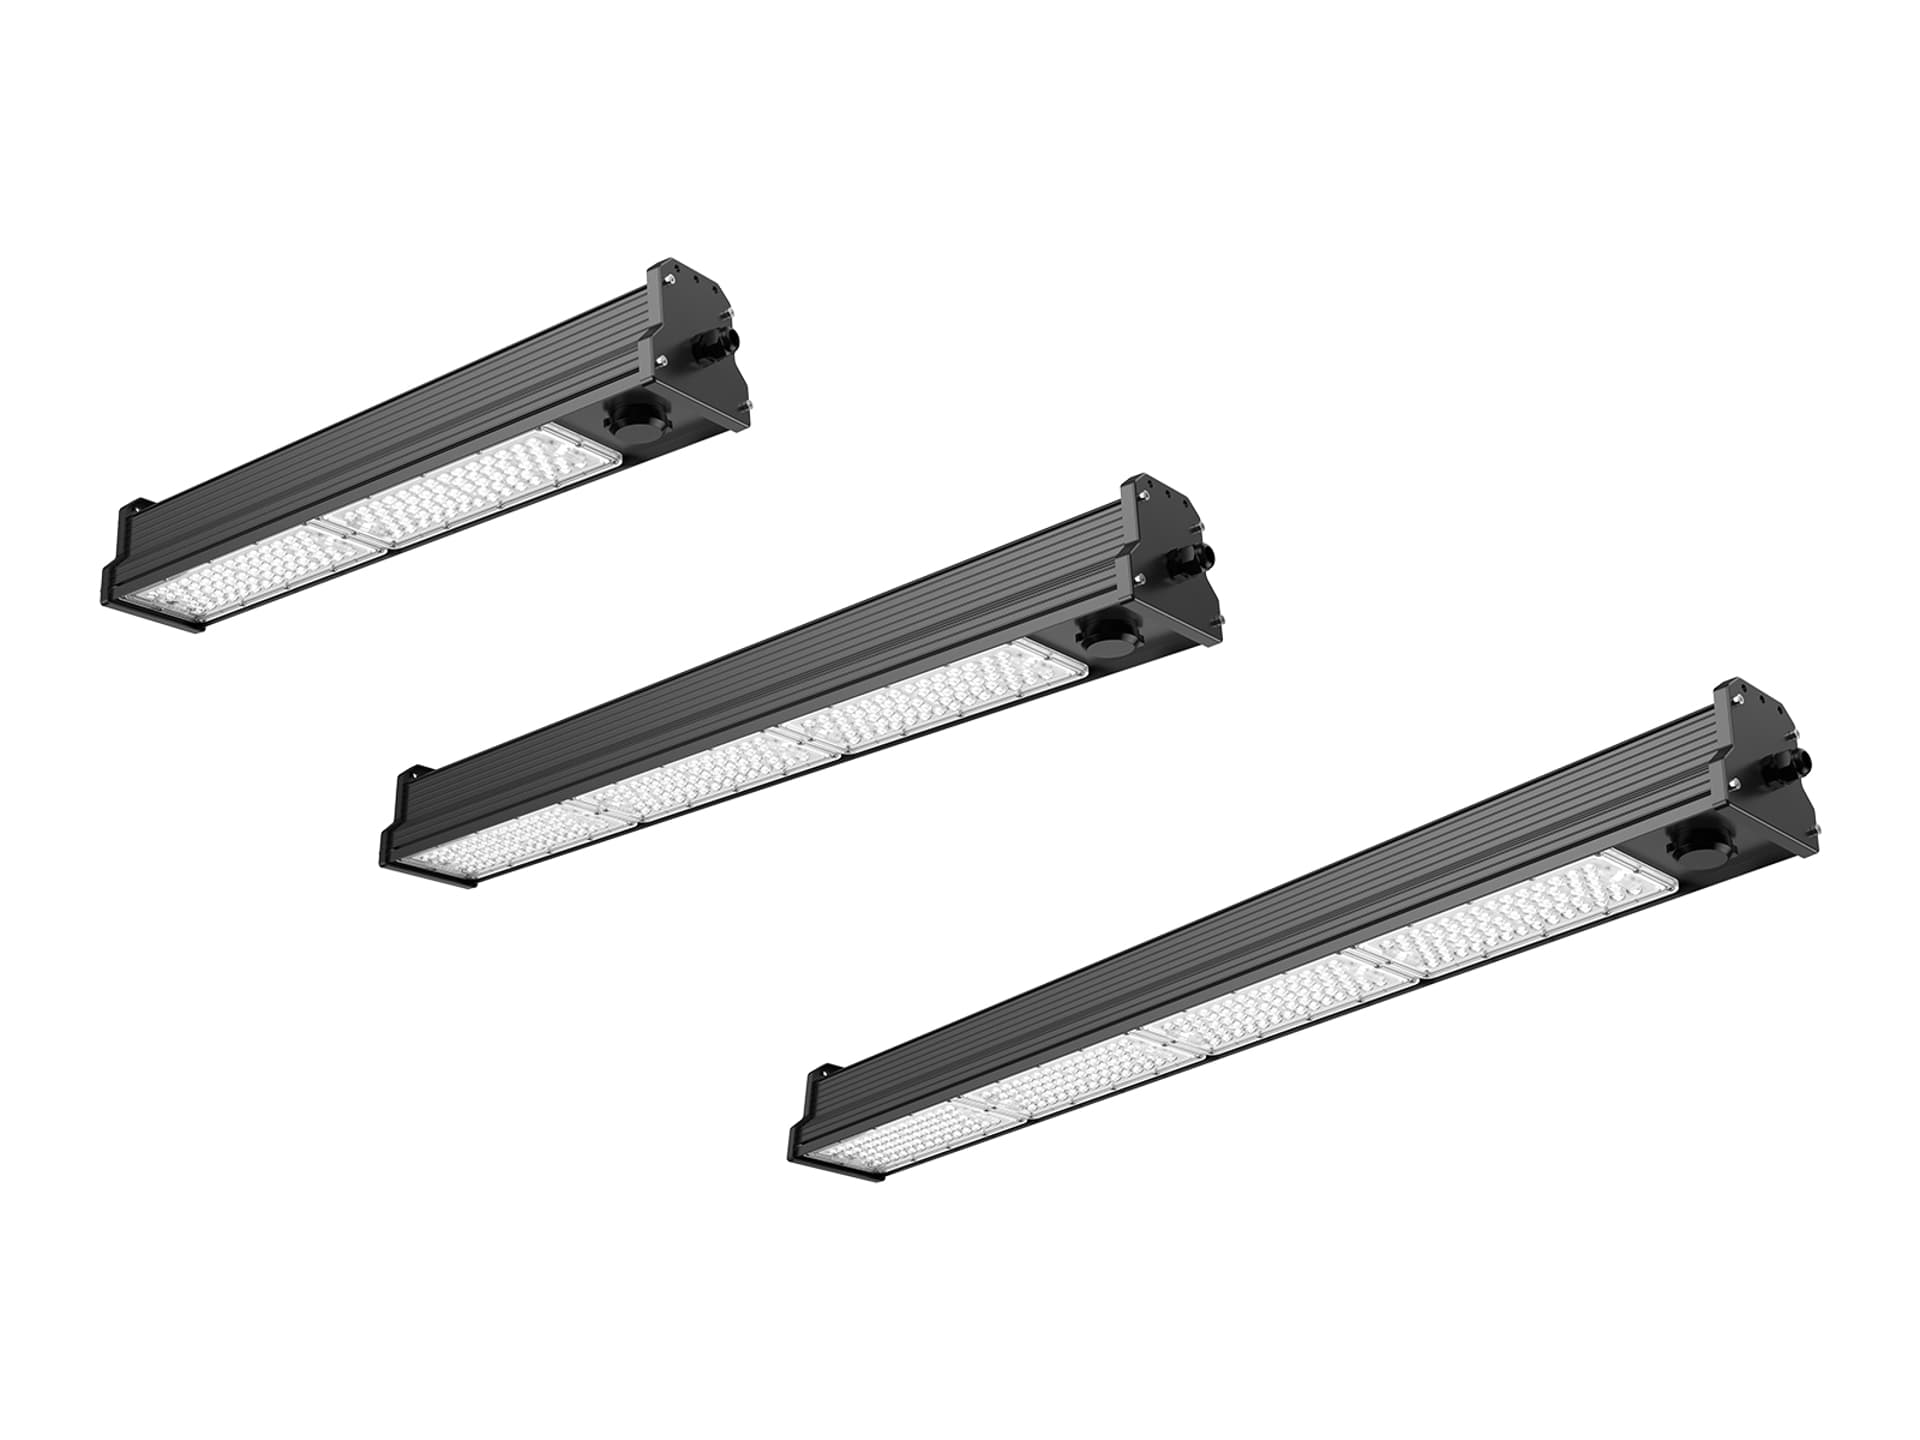 LHB42 100 to 200 watts LED Linear Light